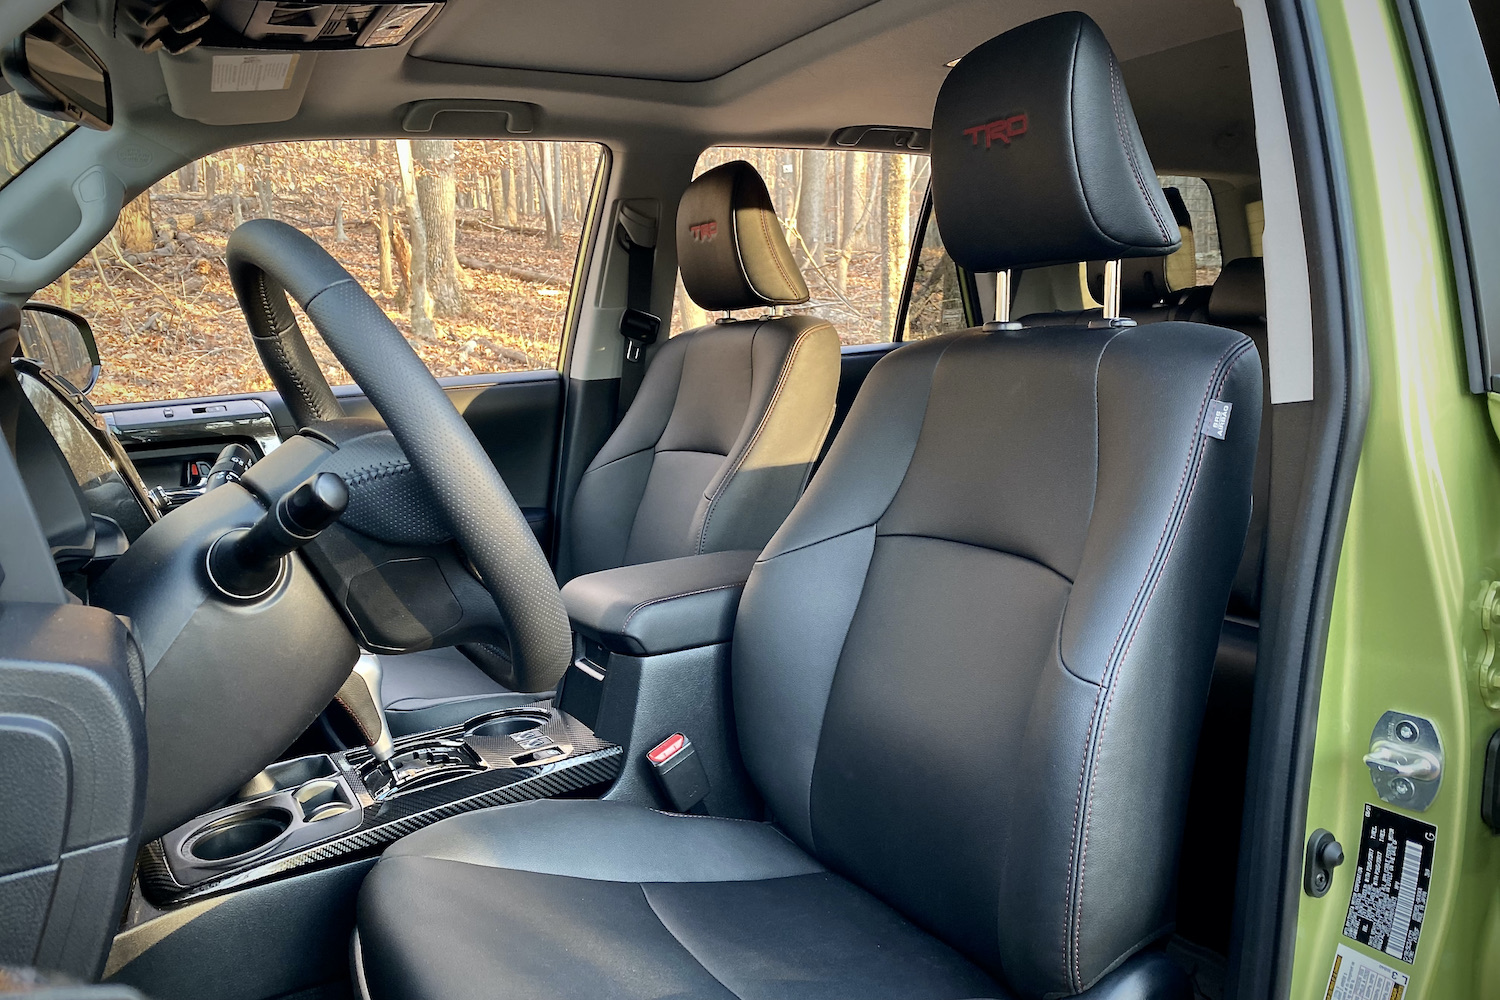 Driver's seat in Toyota 4Runner TRD Pro from outside with trees in the back.